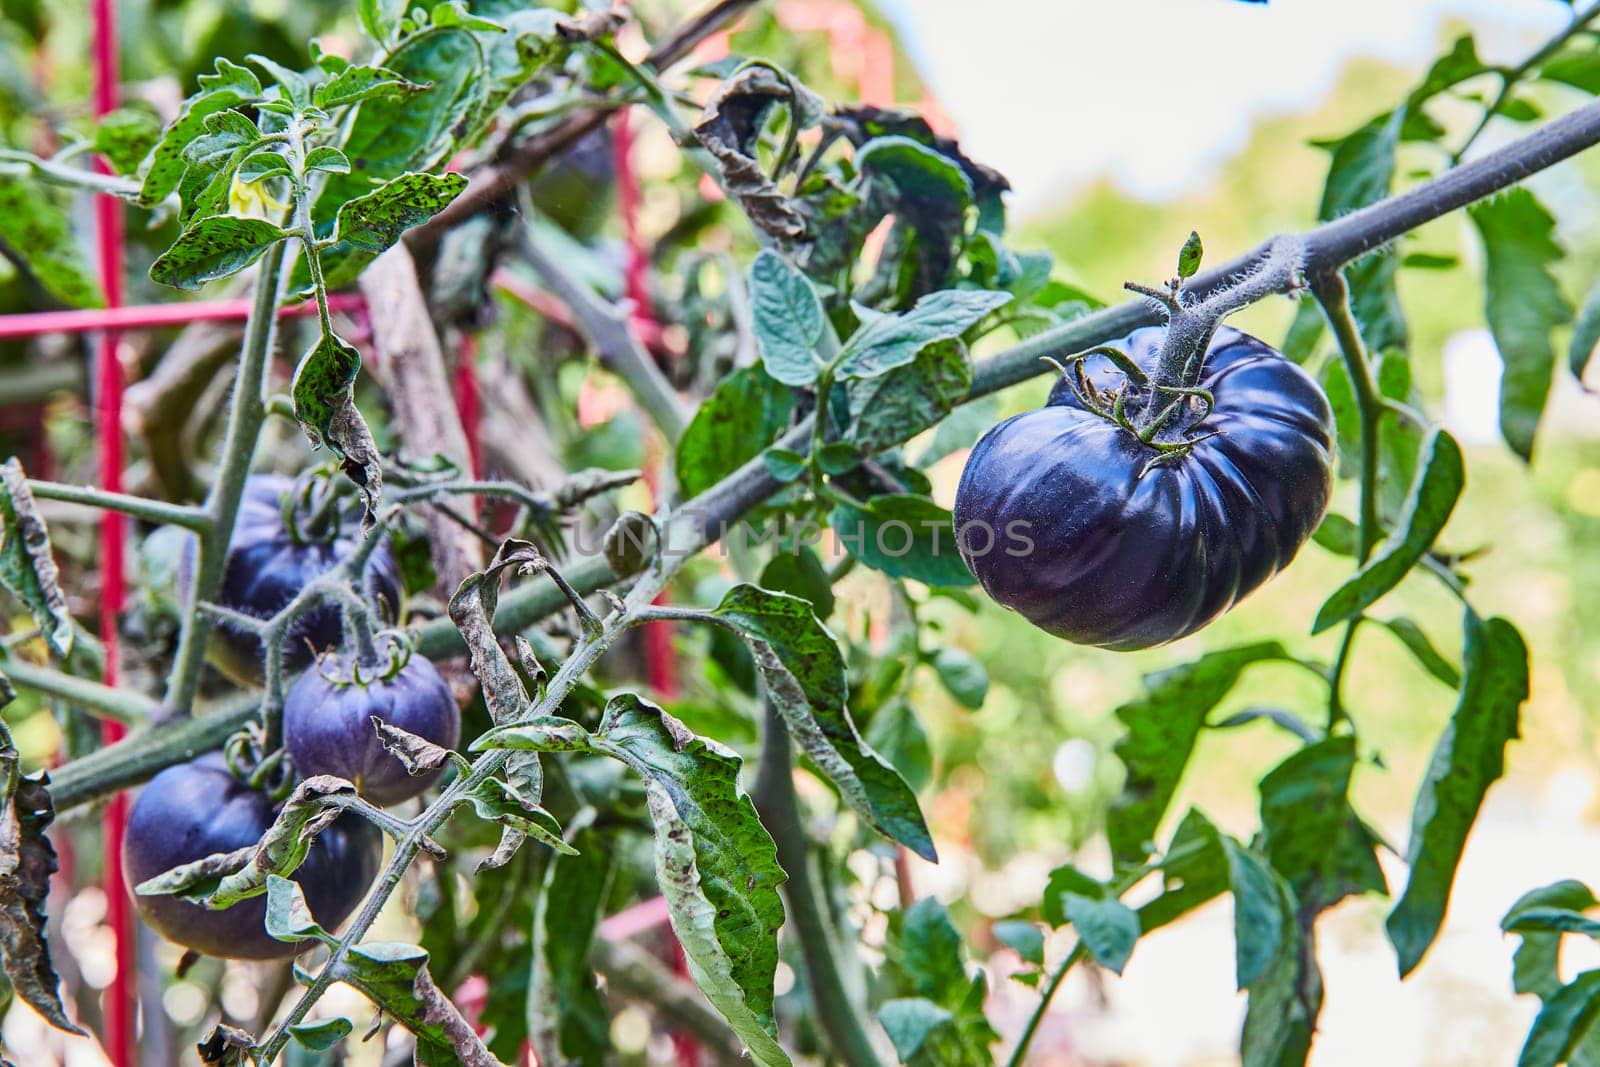 Black Beauty Tomatoes on Lush Plant, Eye-Level View by njproductions